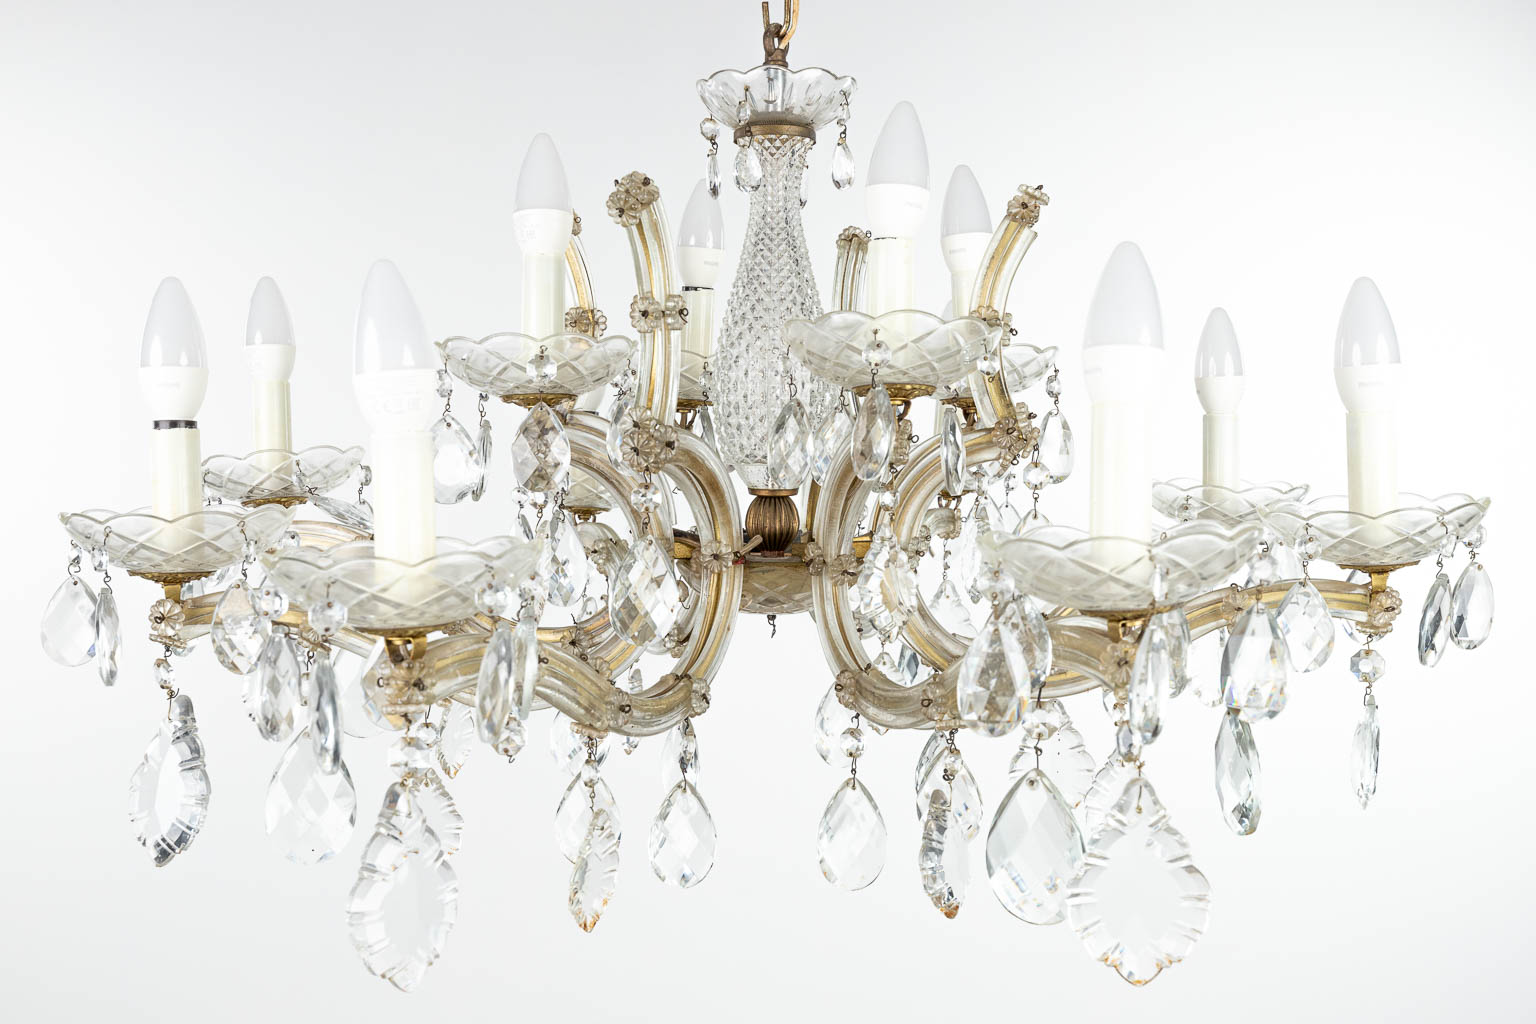 A collection of 2 chandeliers 